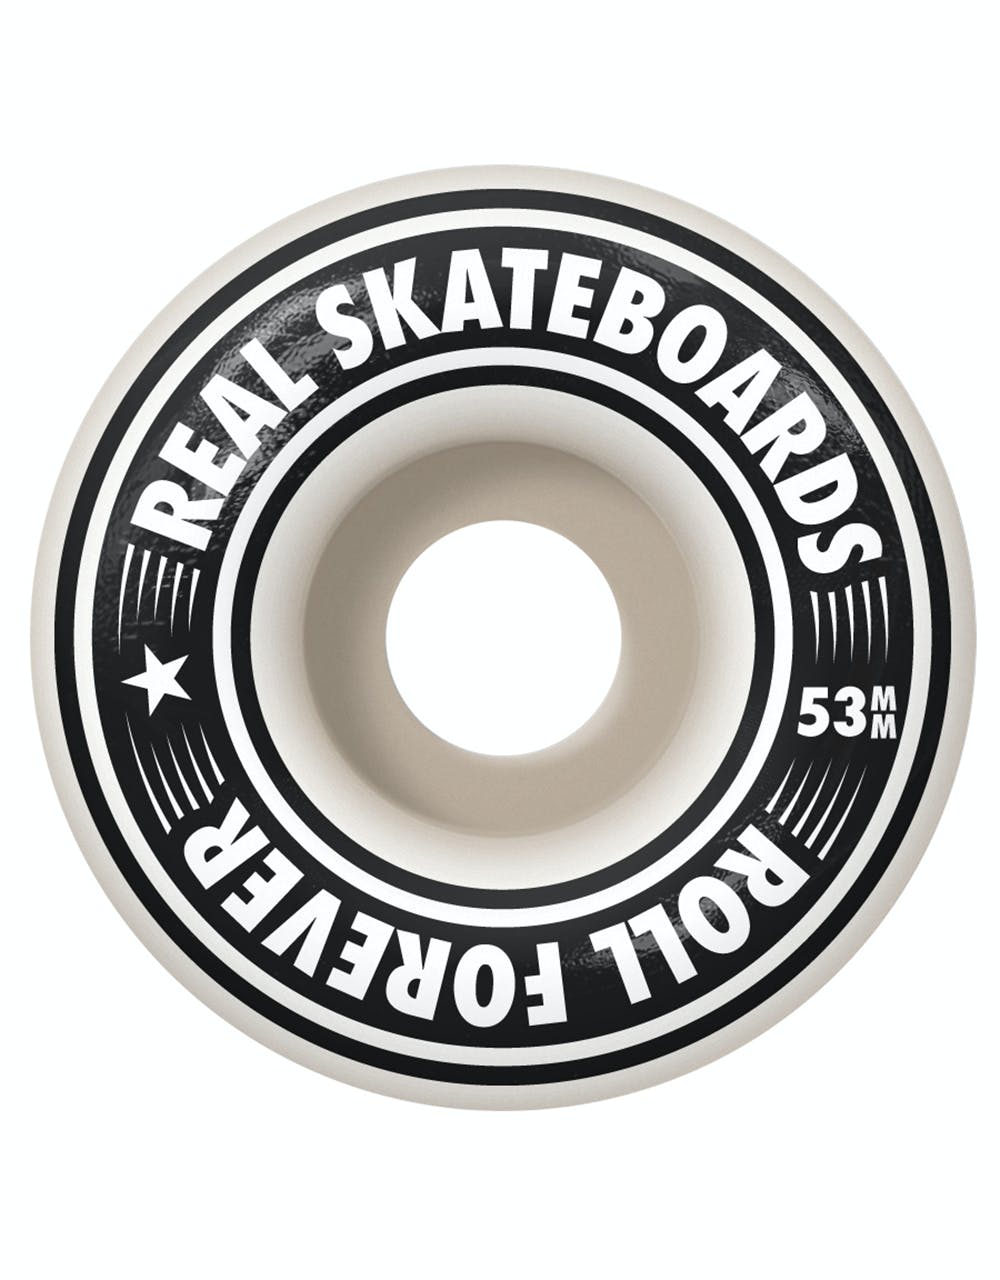 Real Oval Gleams Complete Skateboard - 7.75"